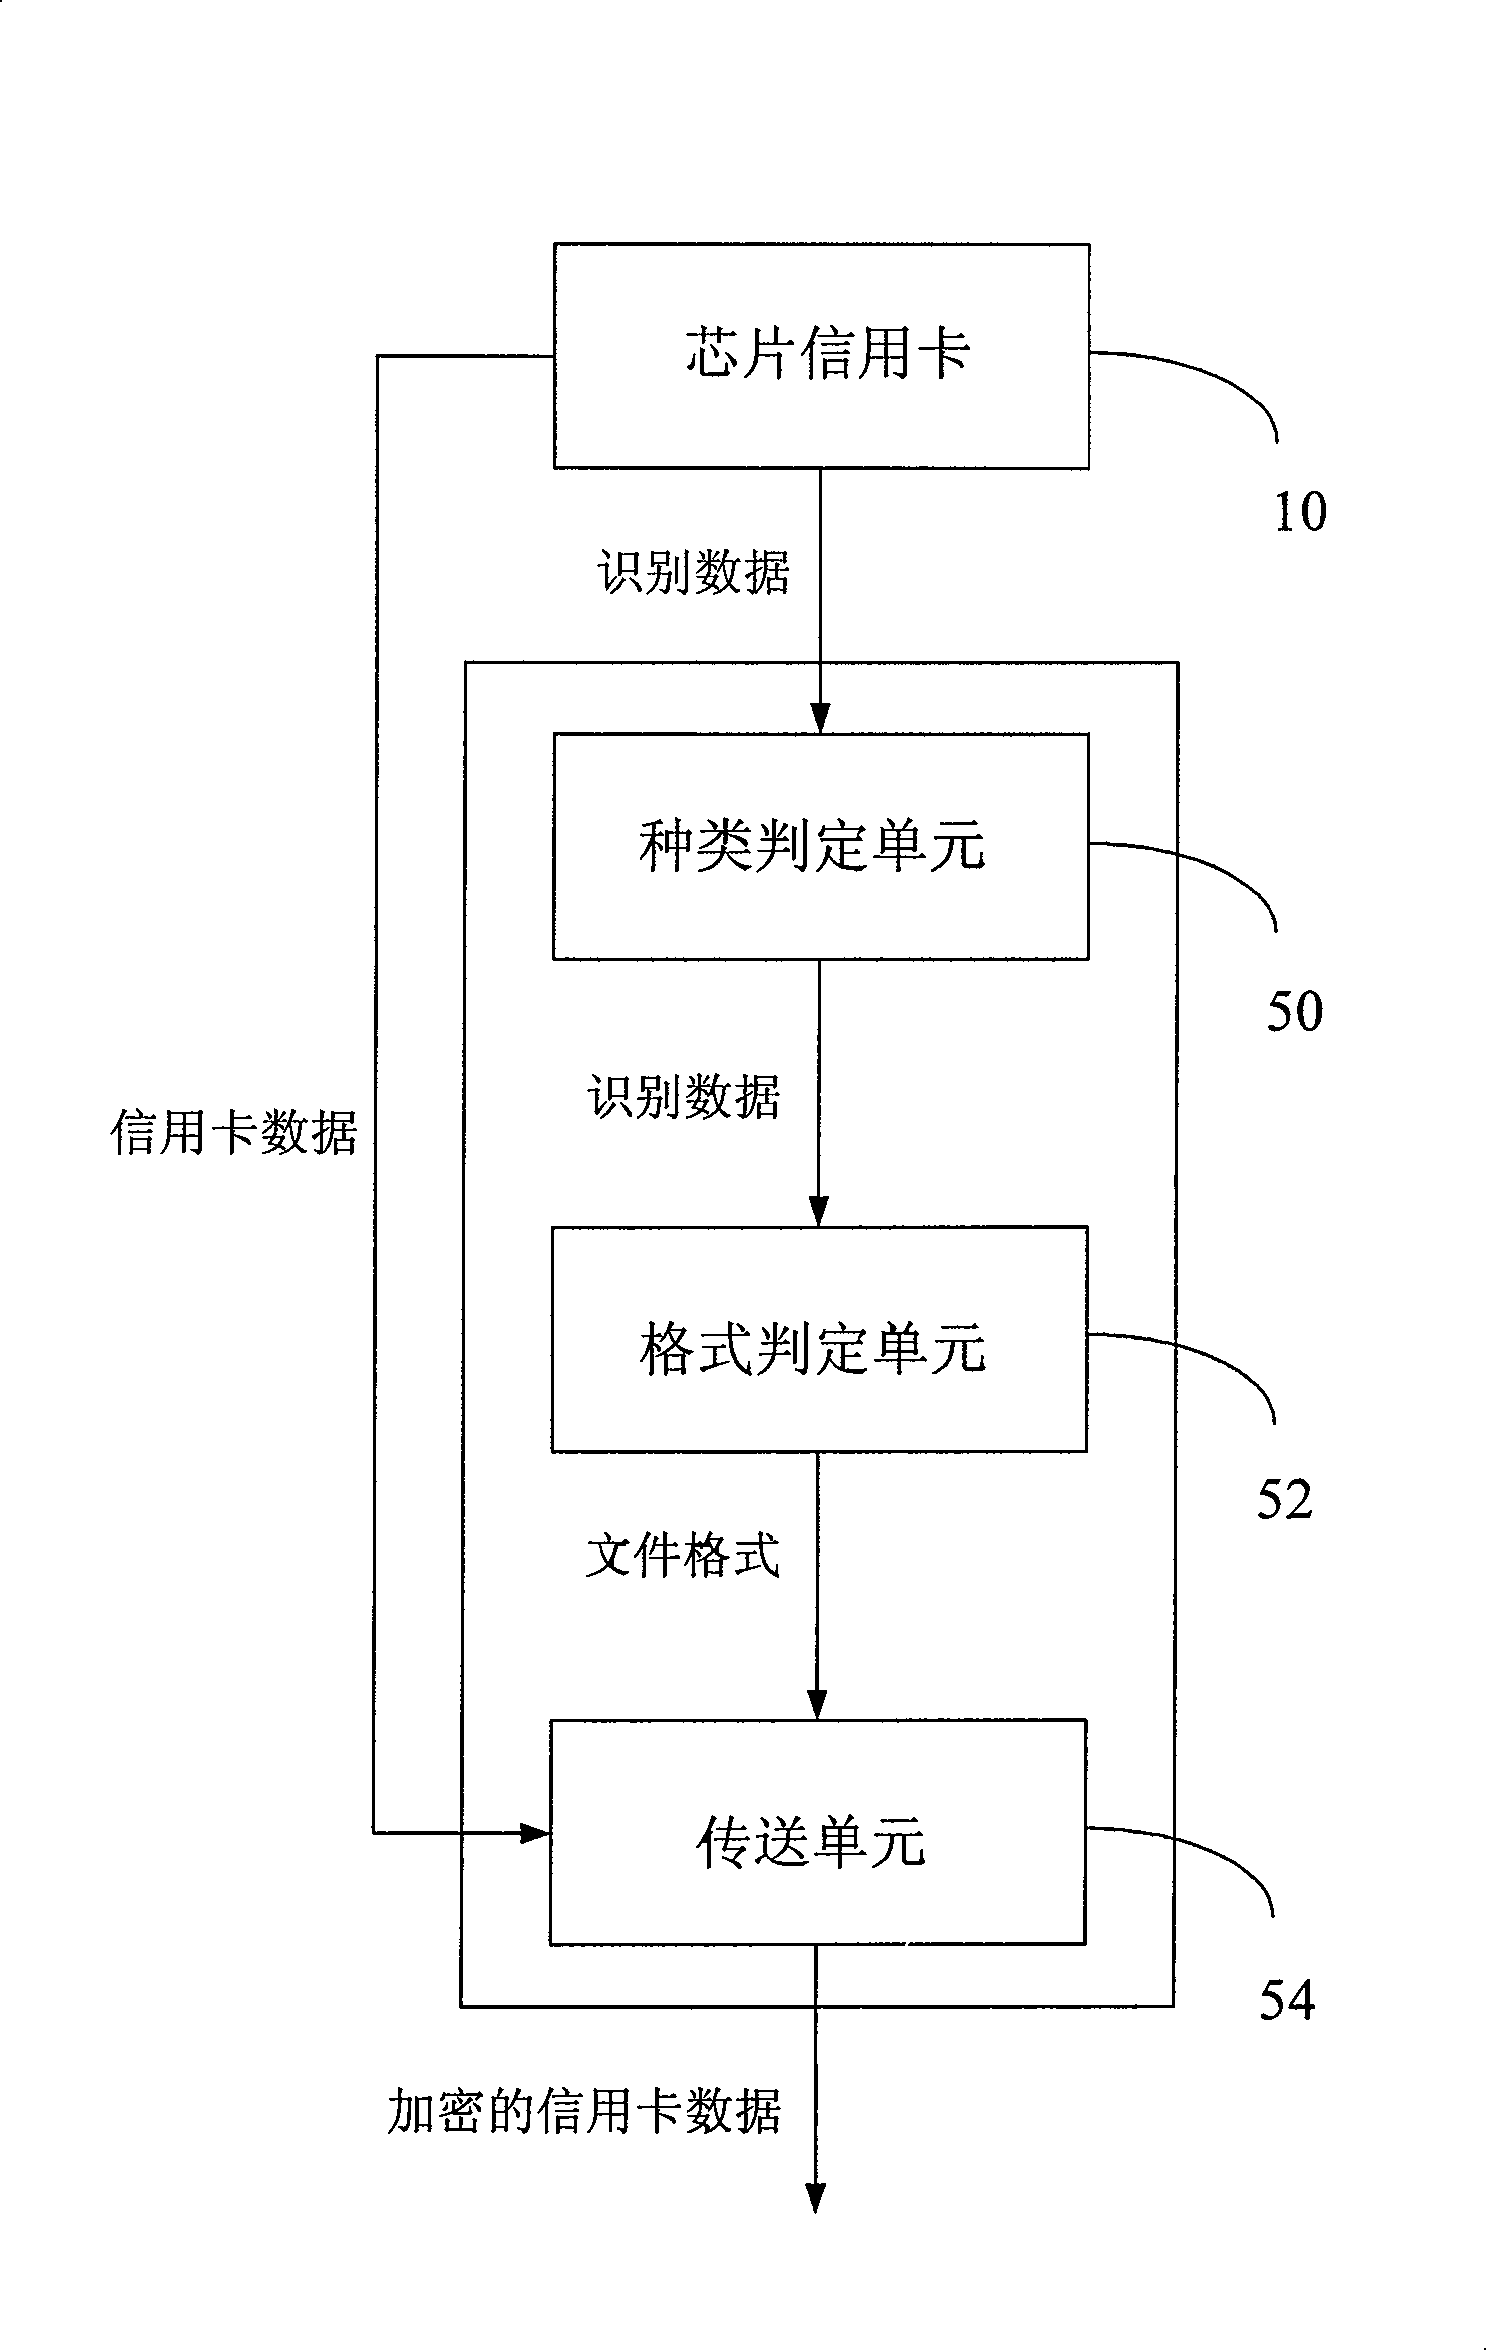 Chip credit card network transaction system and method